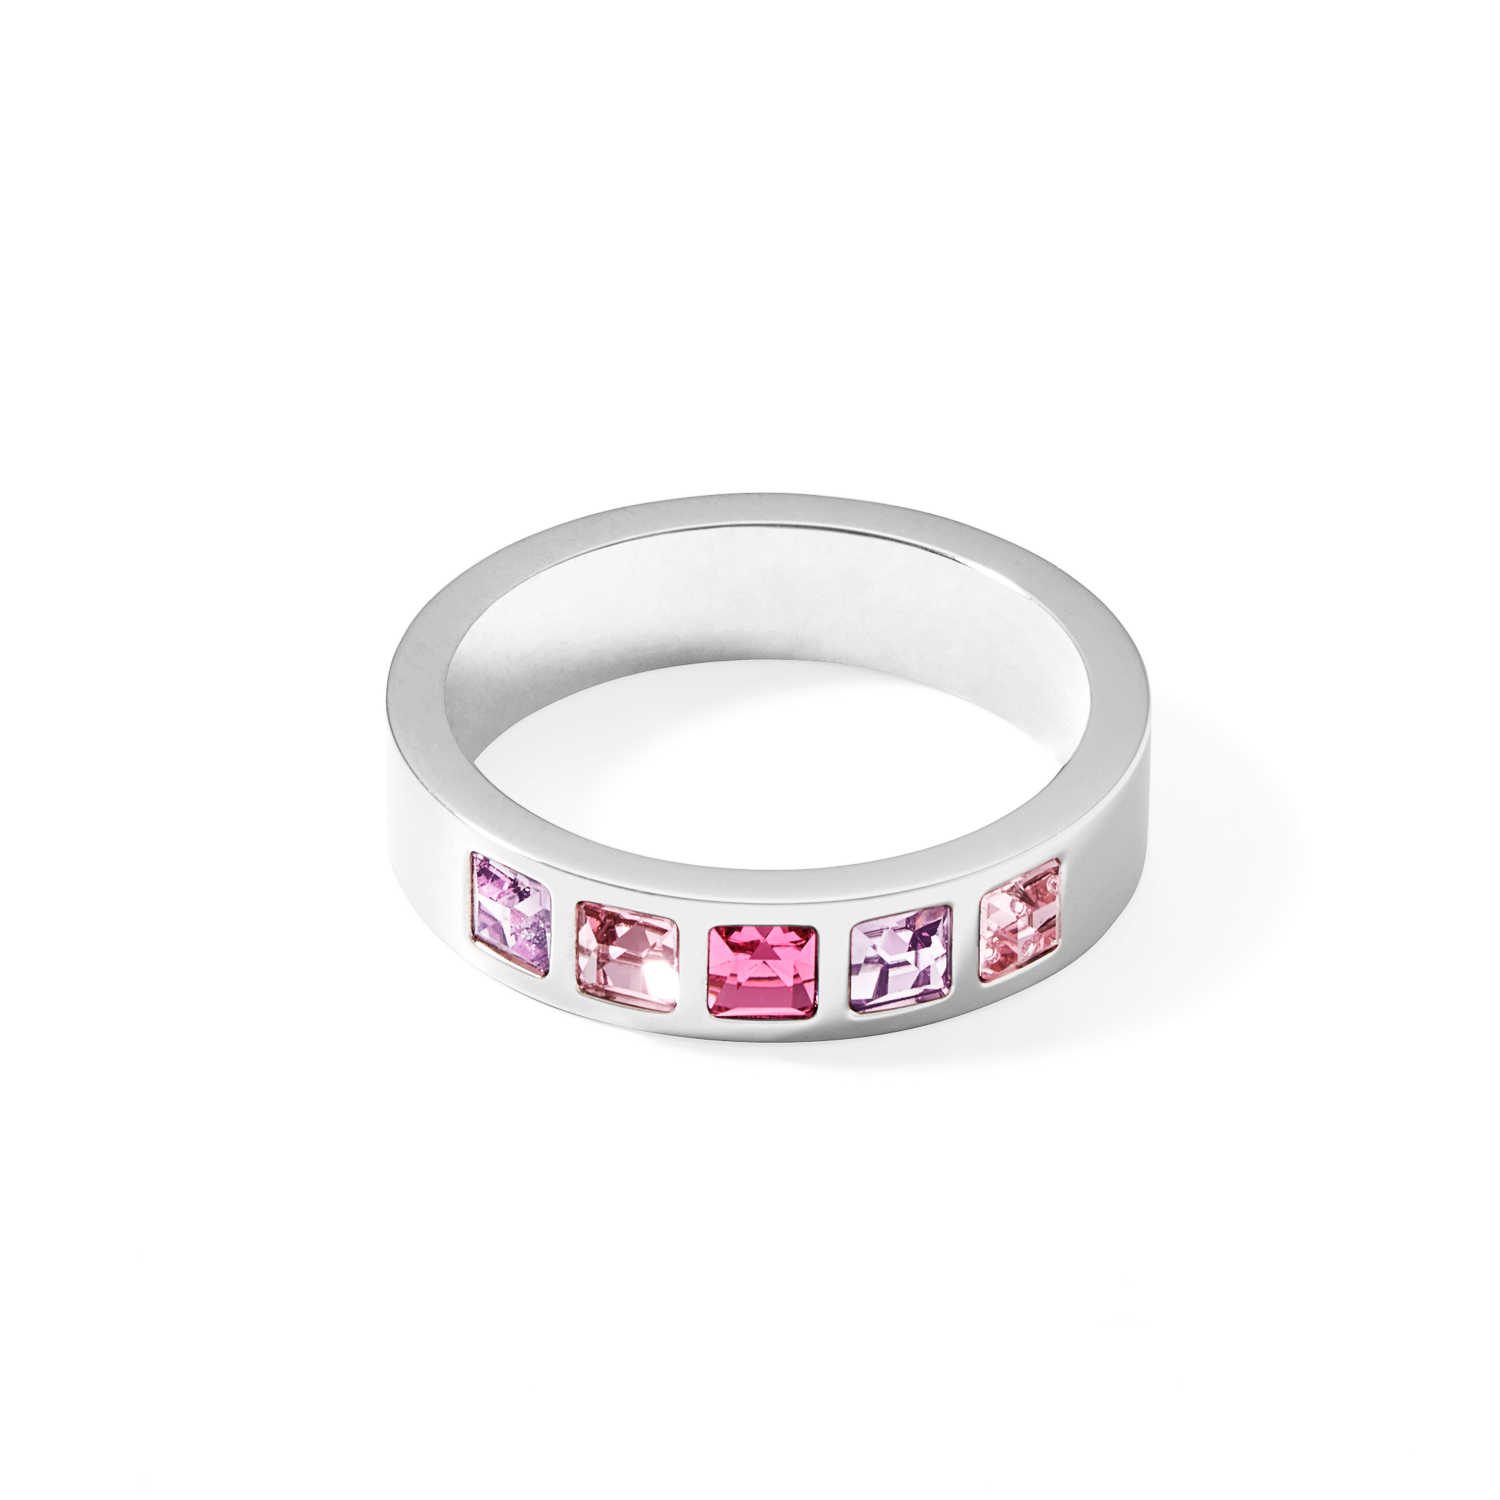 Ring stainless steel silver & square crystals pavé multi-rose